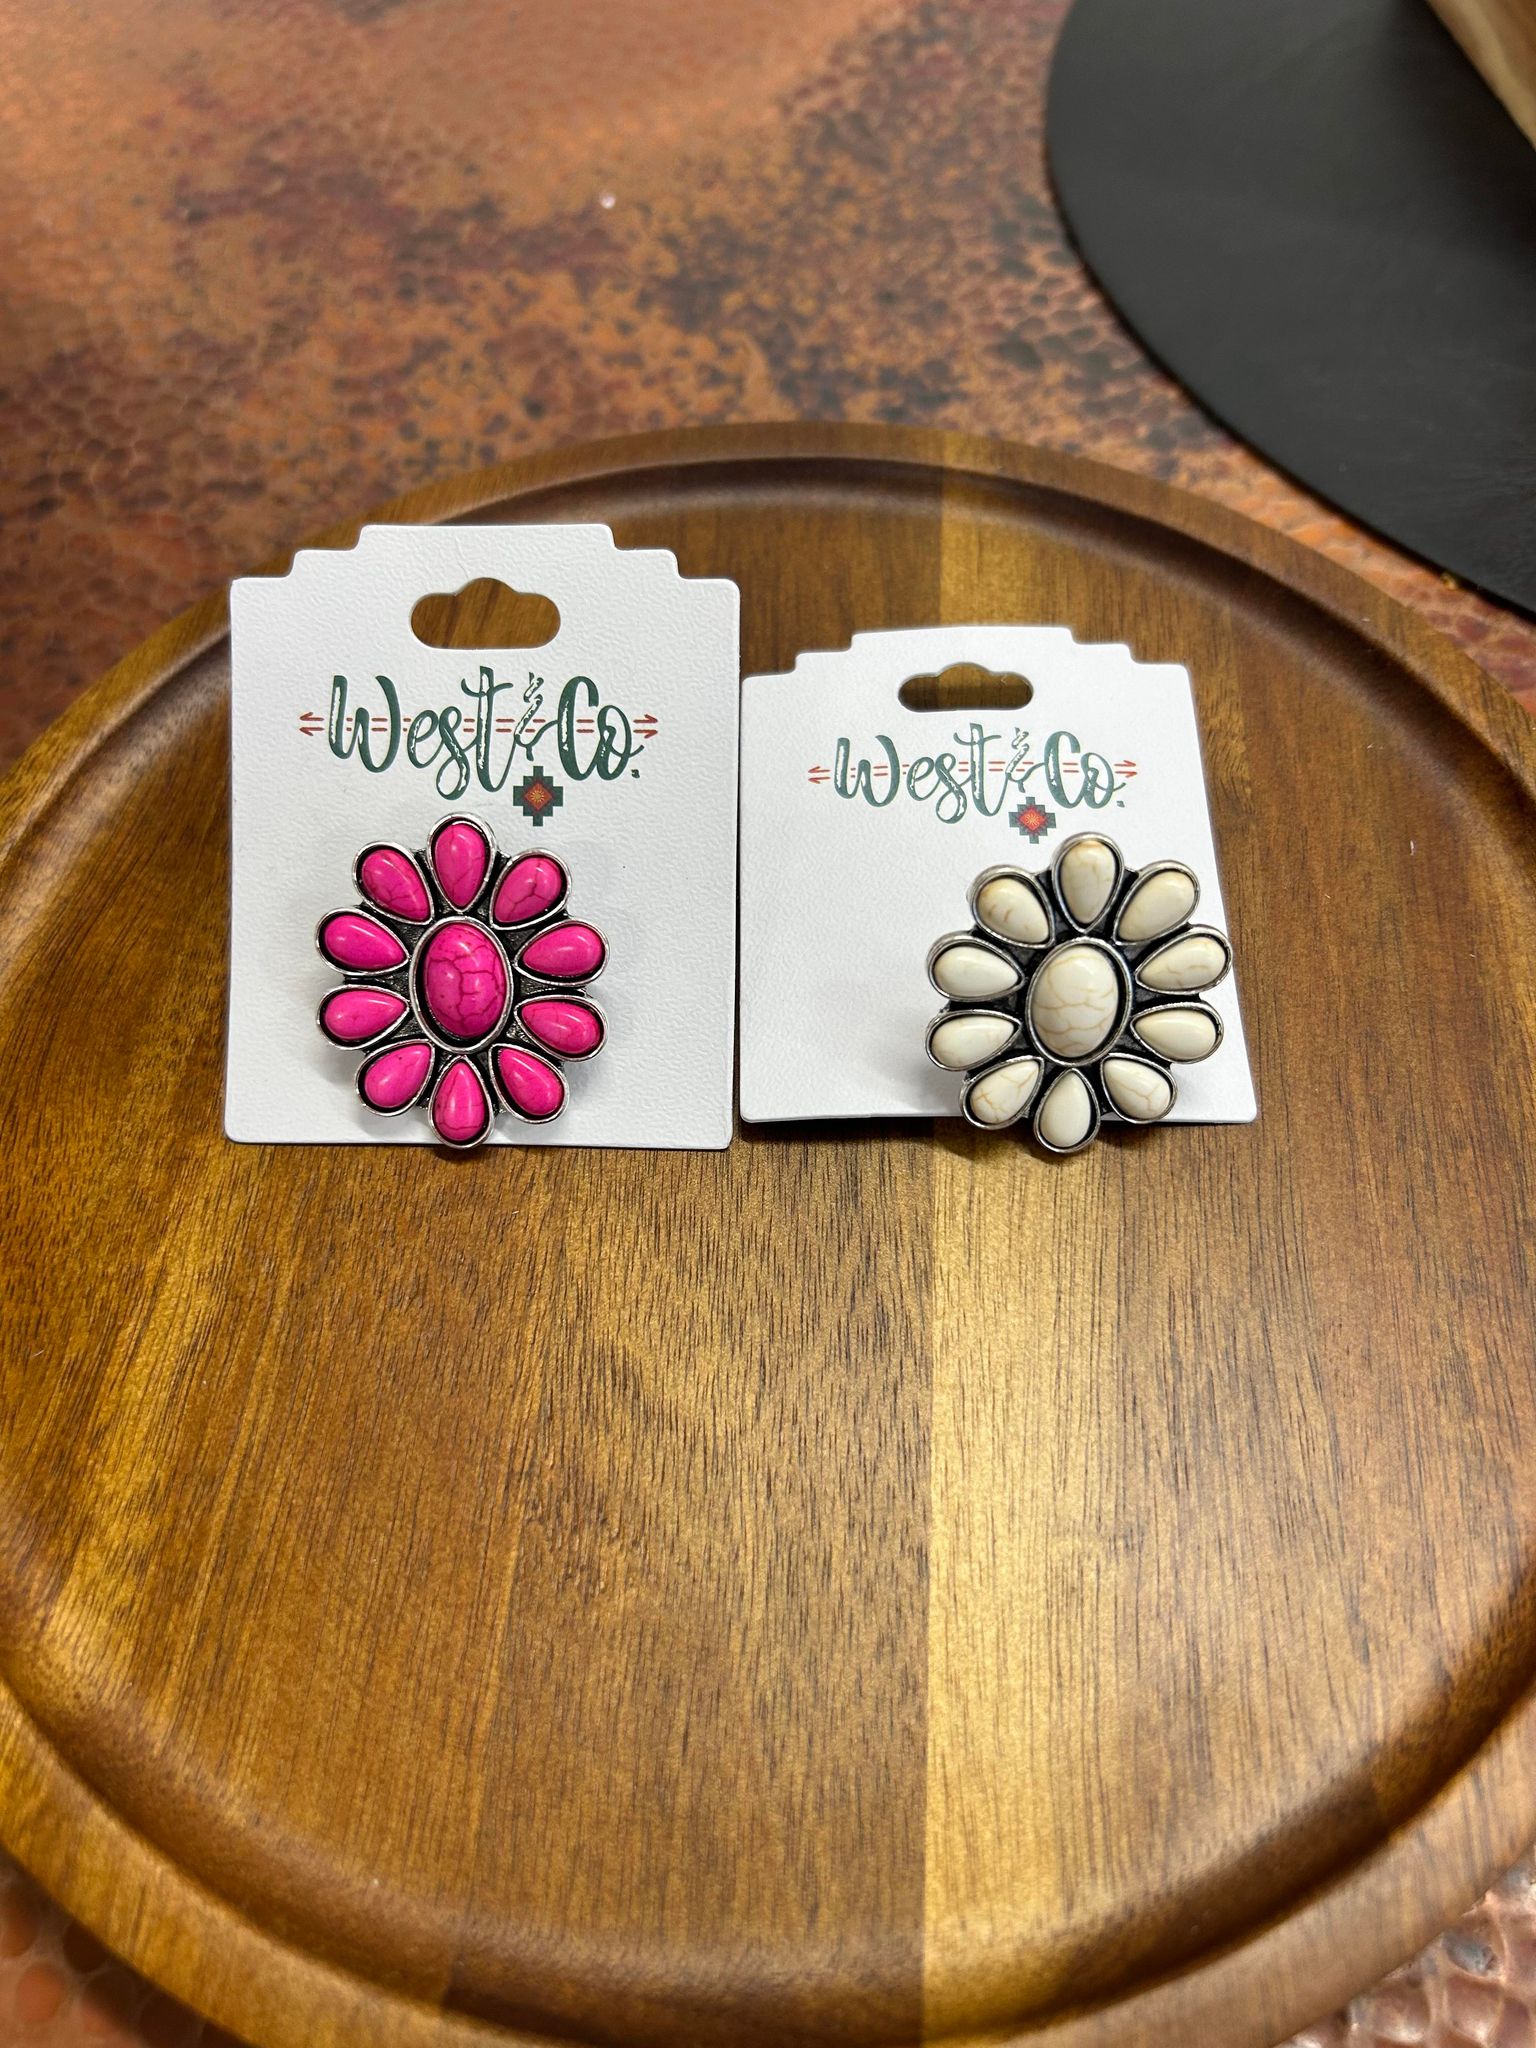 West & Co. Flower Ring-Rings-WEST & CO-Lucky J Boots & More, Women's, Men's, & Kids Western Store Located in Carthage, MO